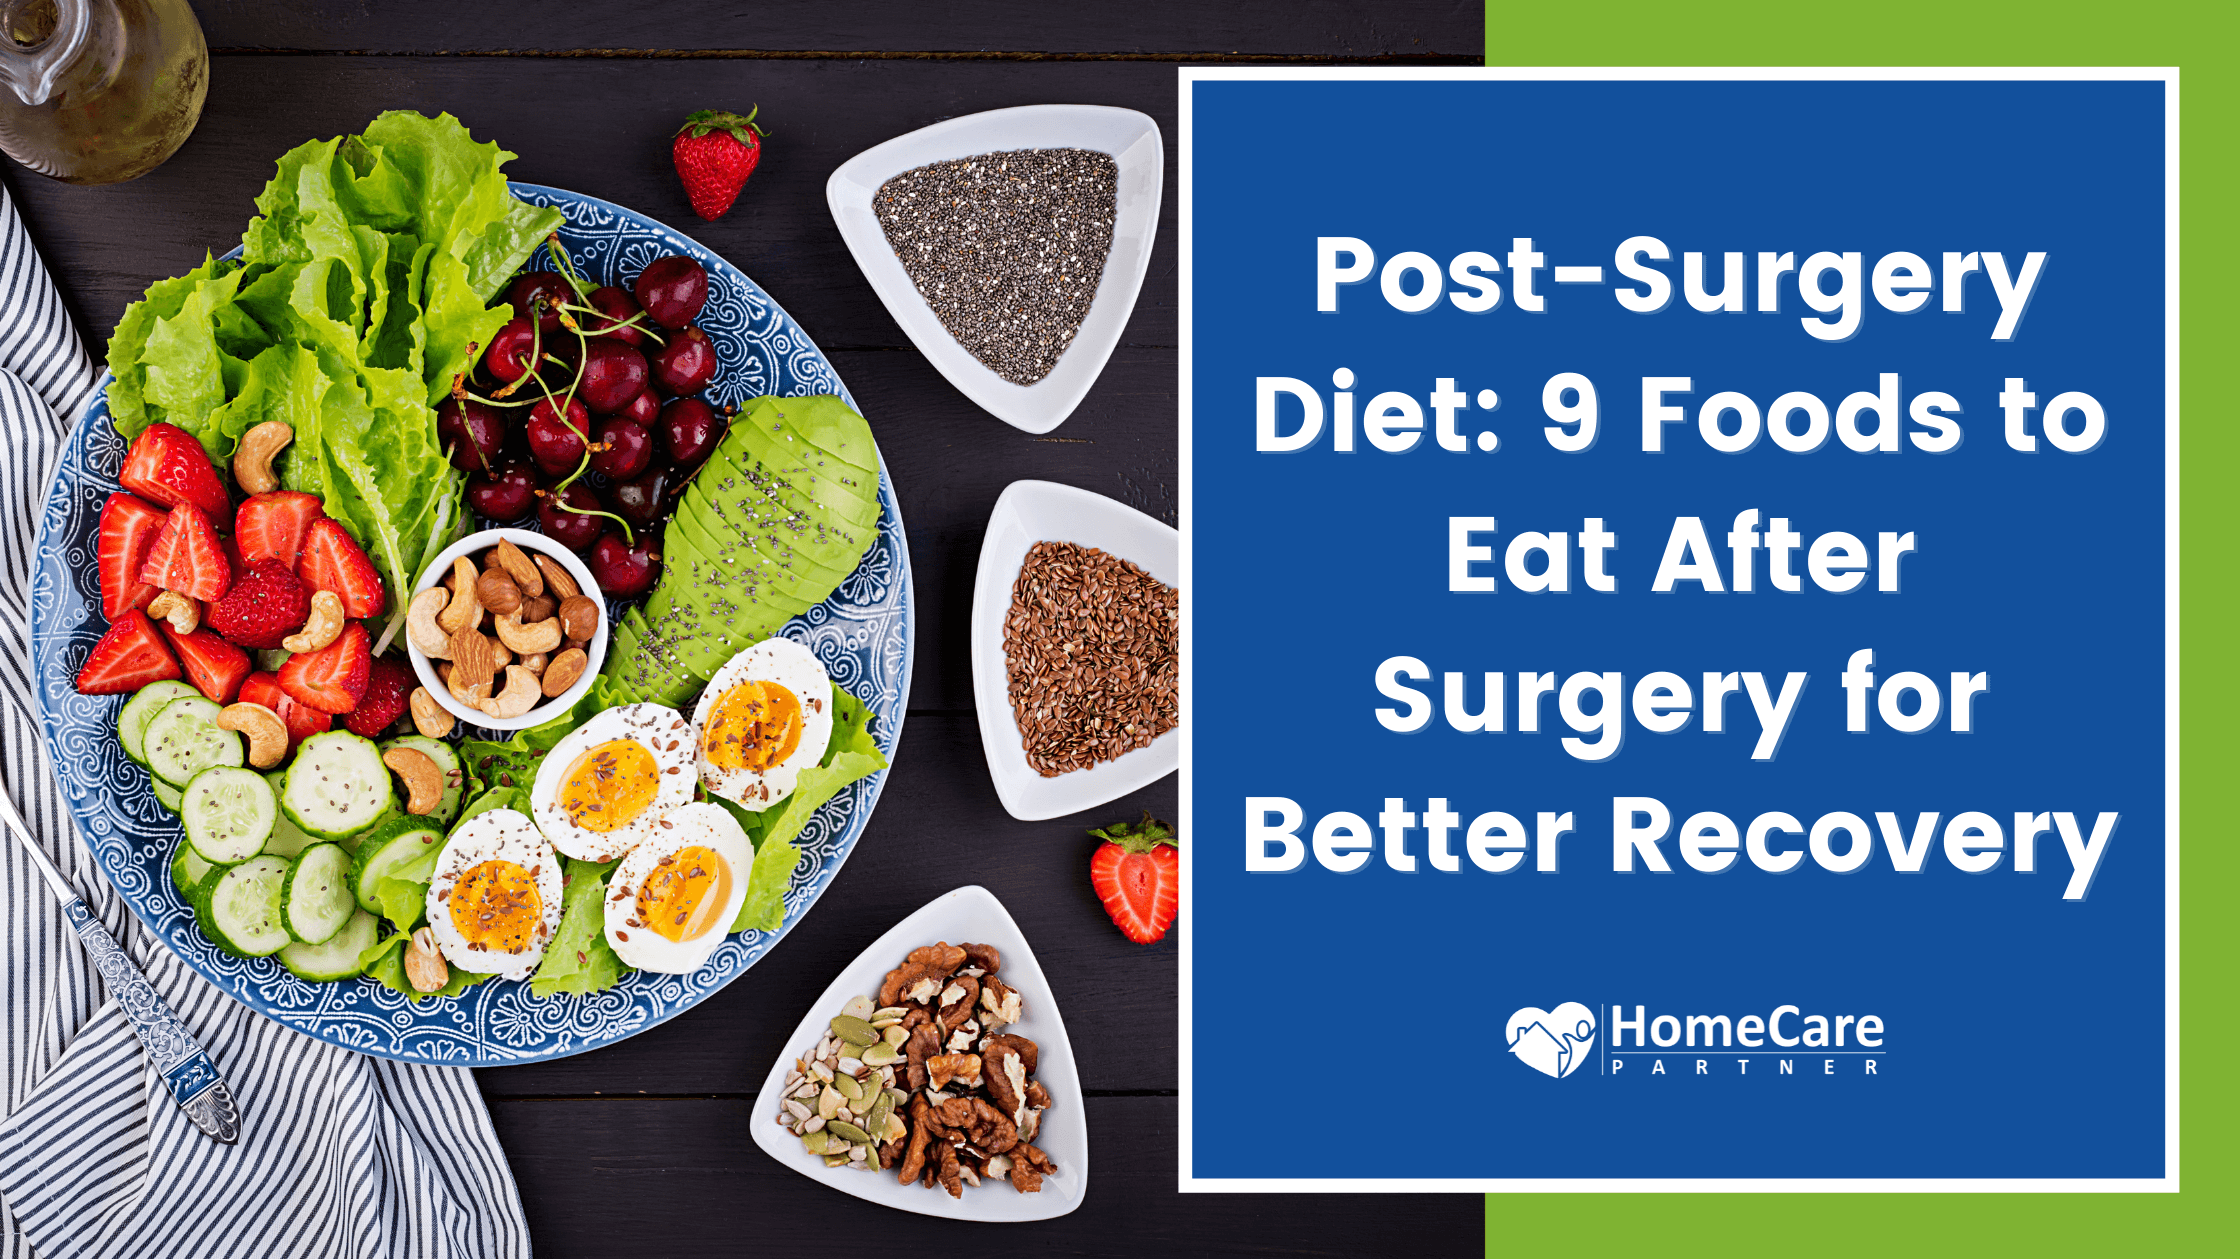 Post-Surgery Diet: 9 Foods to Eat After Surgery for Better Recovery